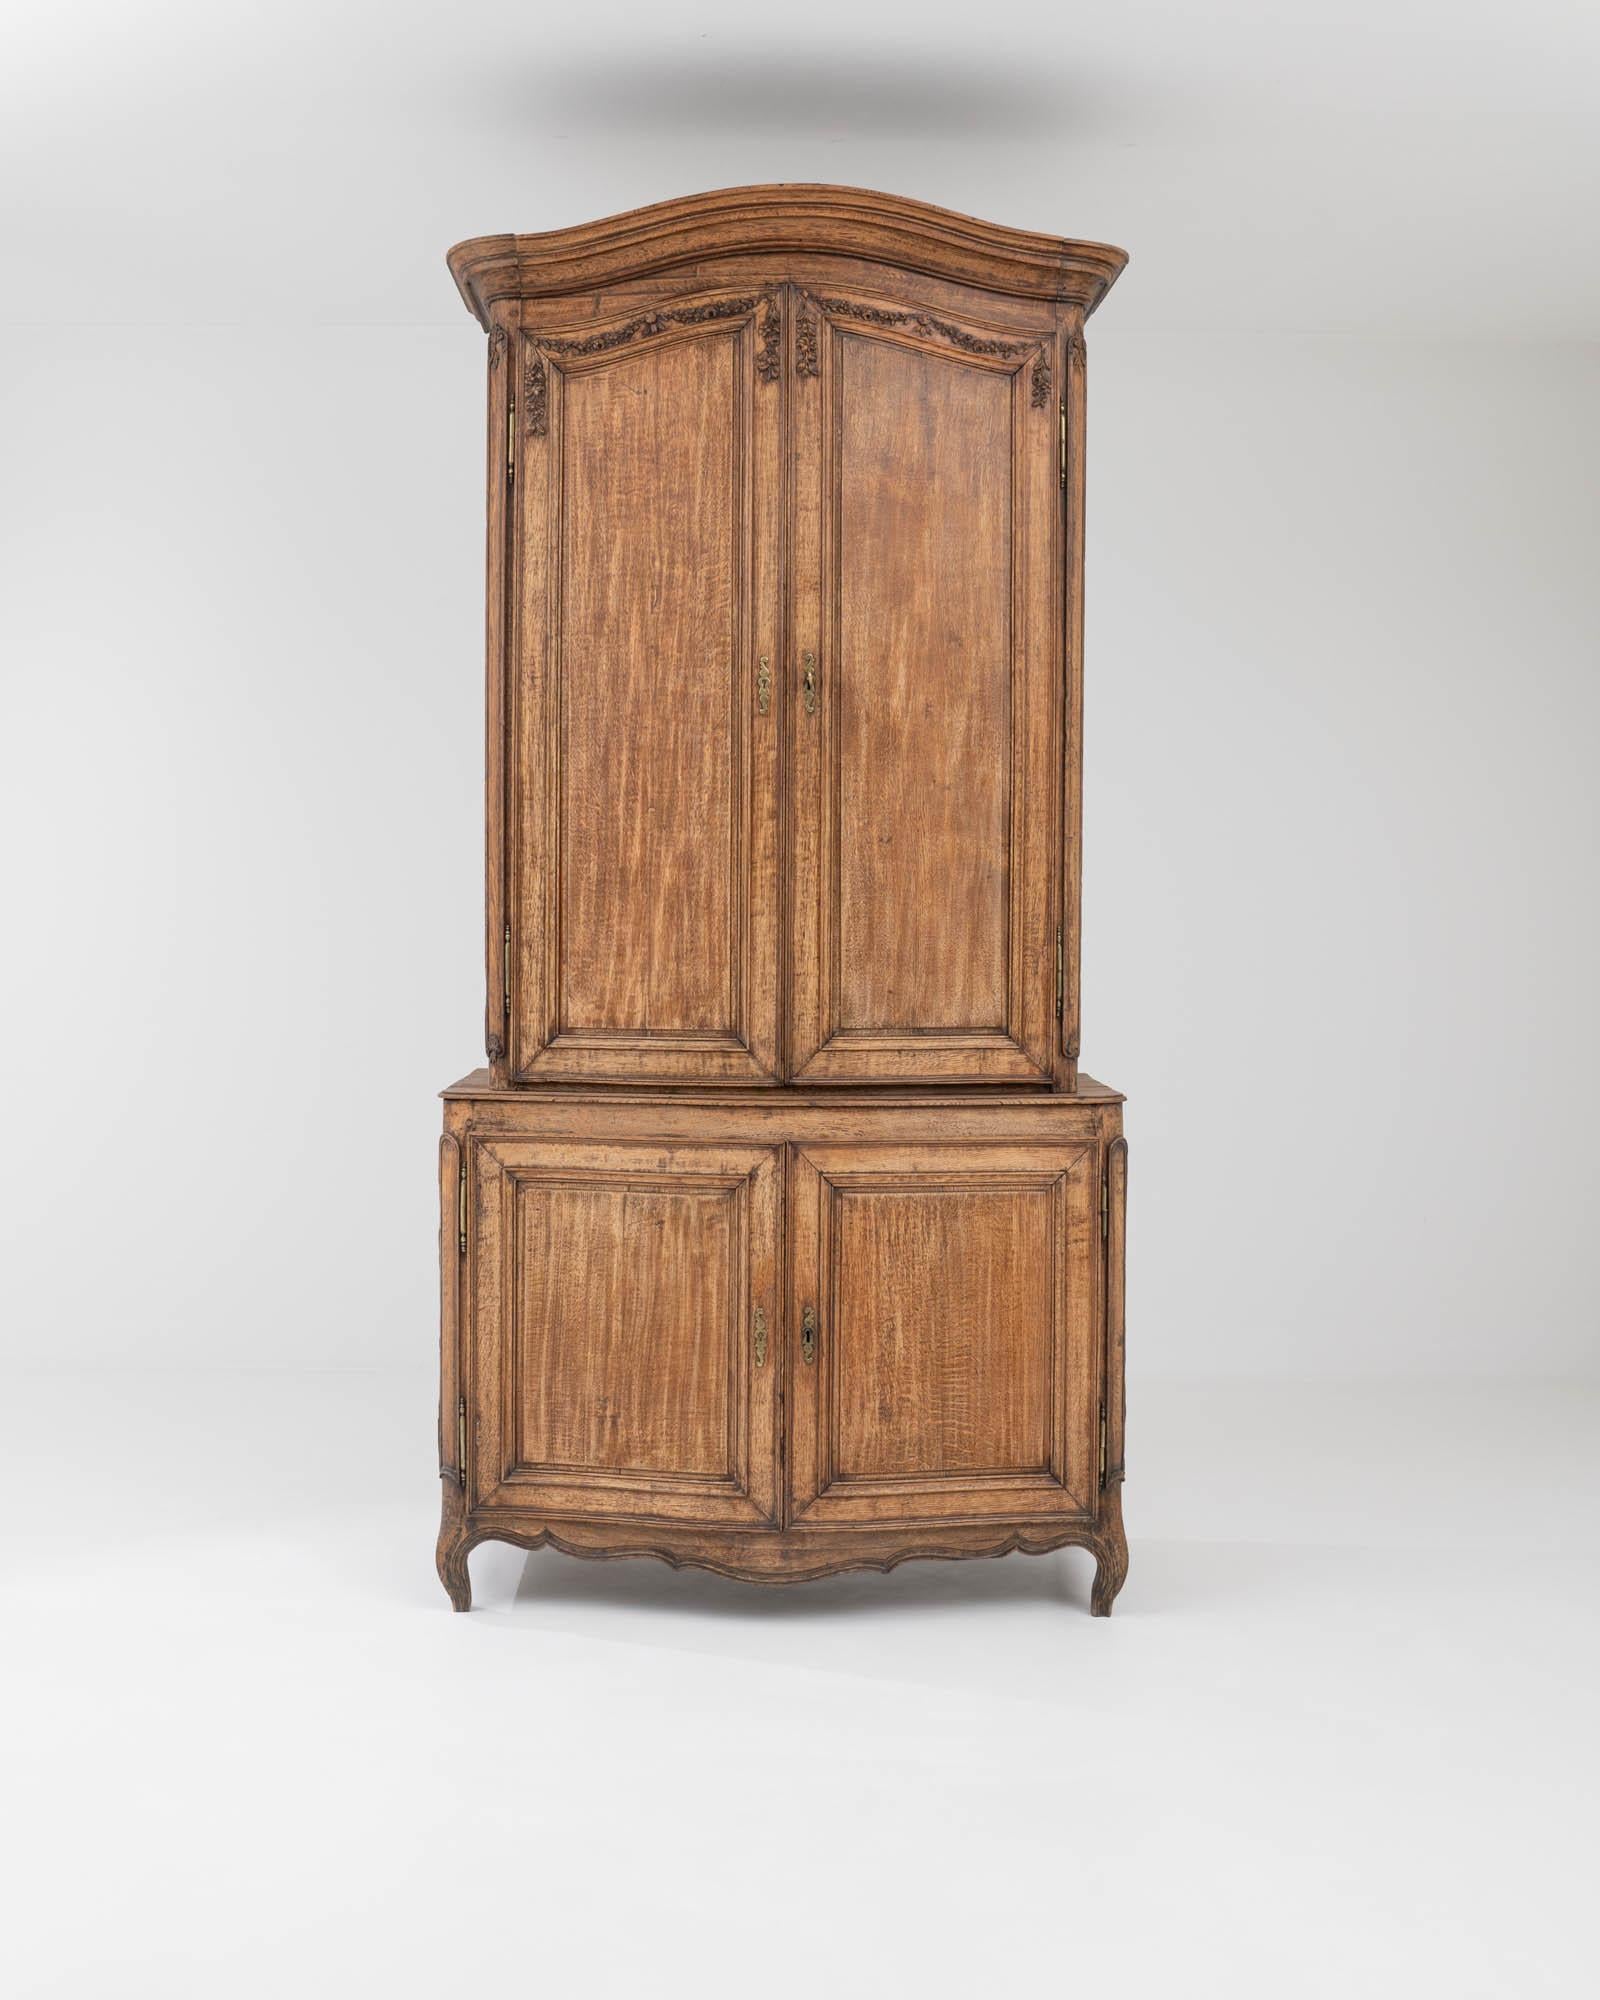 Tall and graceful, this antique wooden cabinet offers an attractive period piece. Hand-built in France in the early 1800s, elegant Rococo details bring out the delicate character of the generously proportioned case. Cabriole feet create a poised